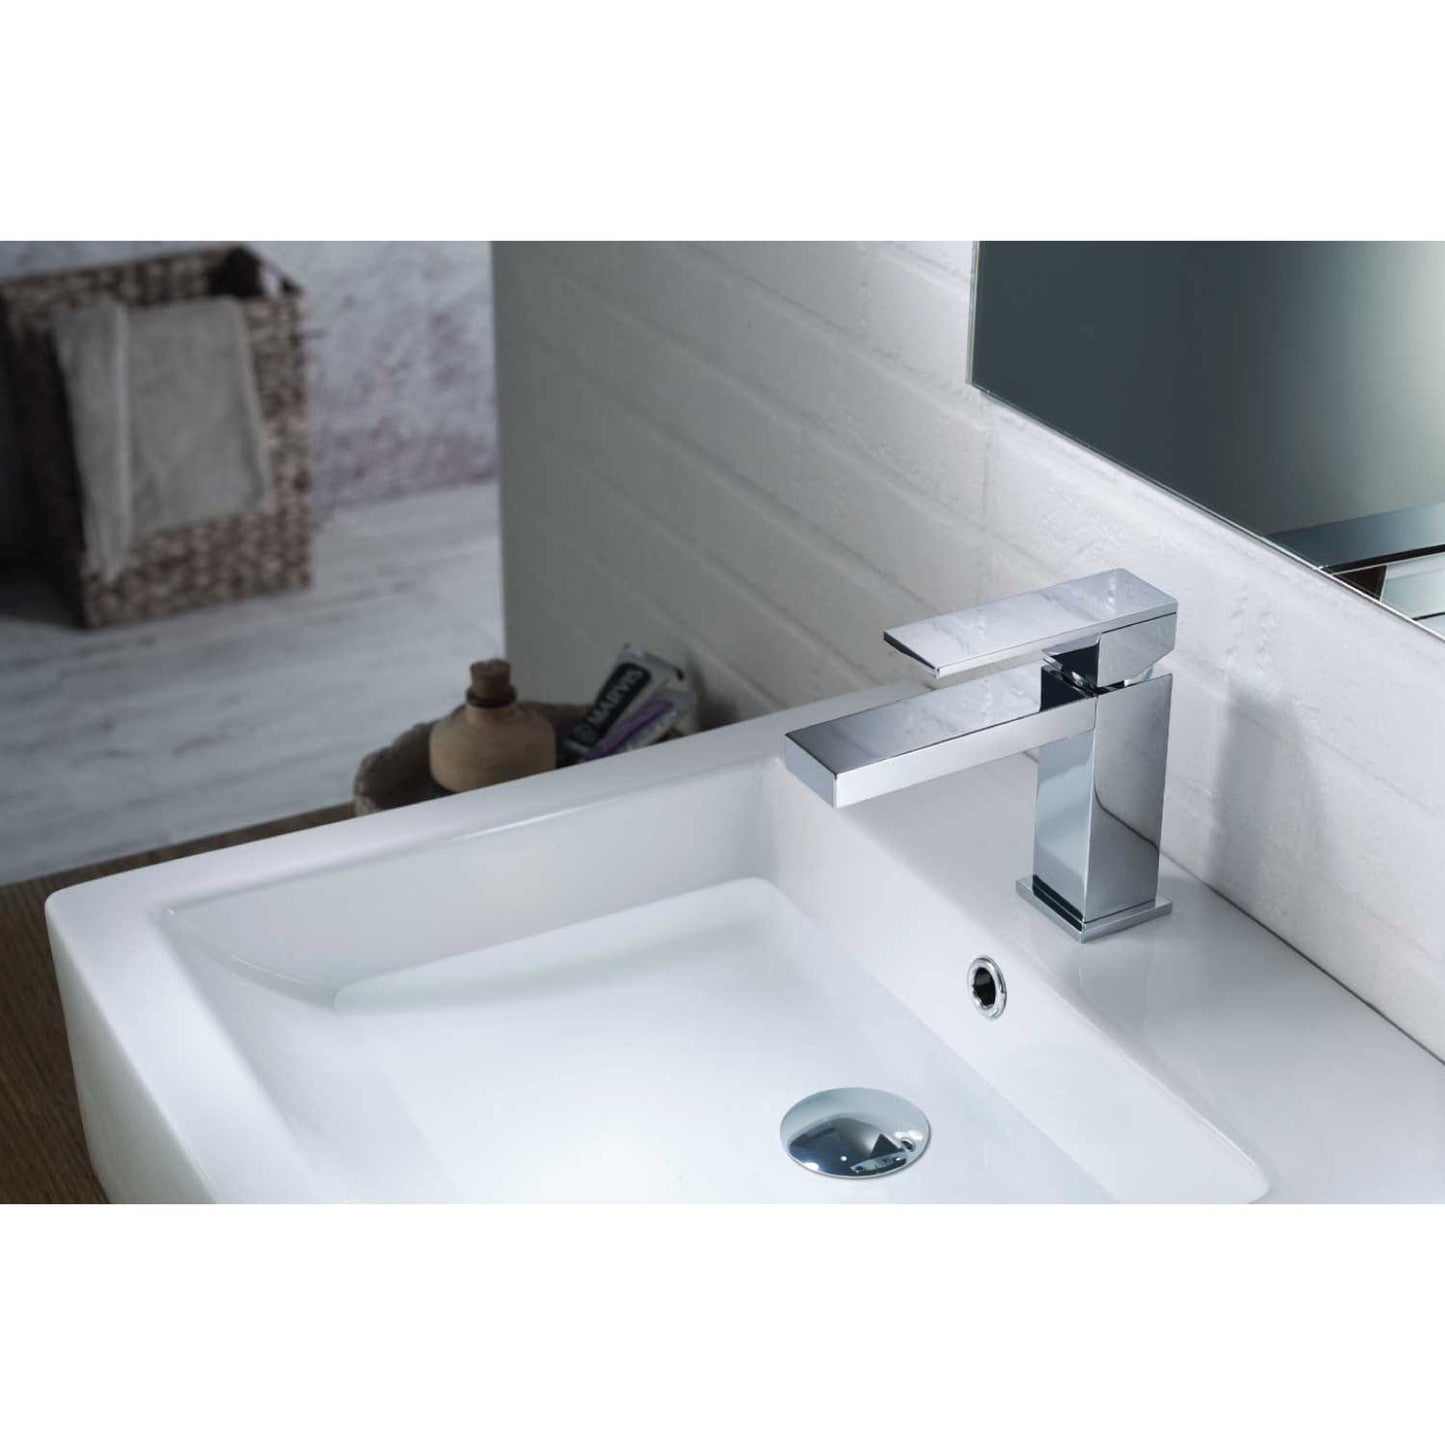 Isenberg Serie 160 6" Single-Hole Brushed Nickel PVD Deck-Mounted Bathroom Sink Faucet With Pop-Up Drain